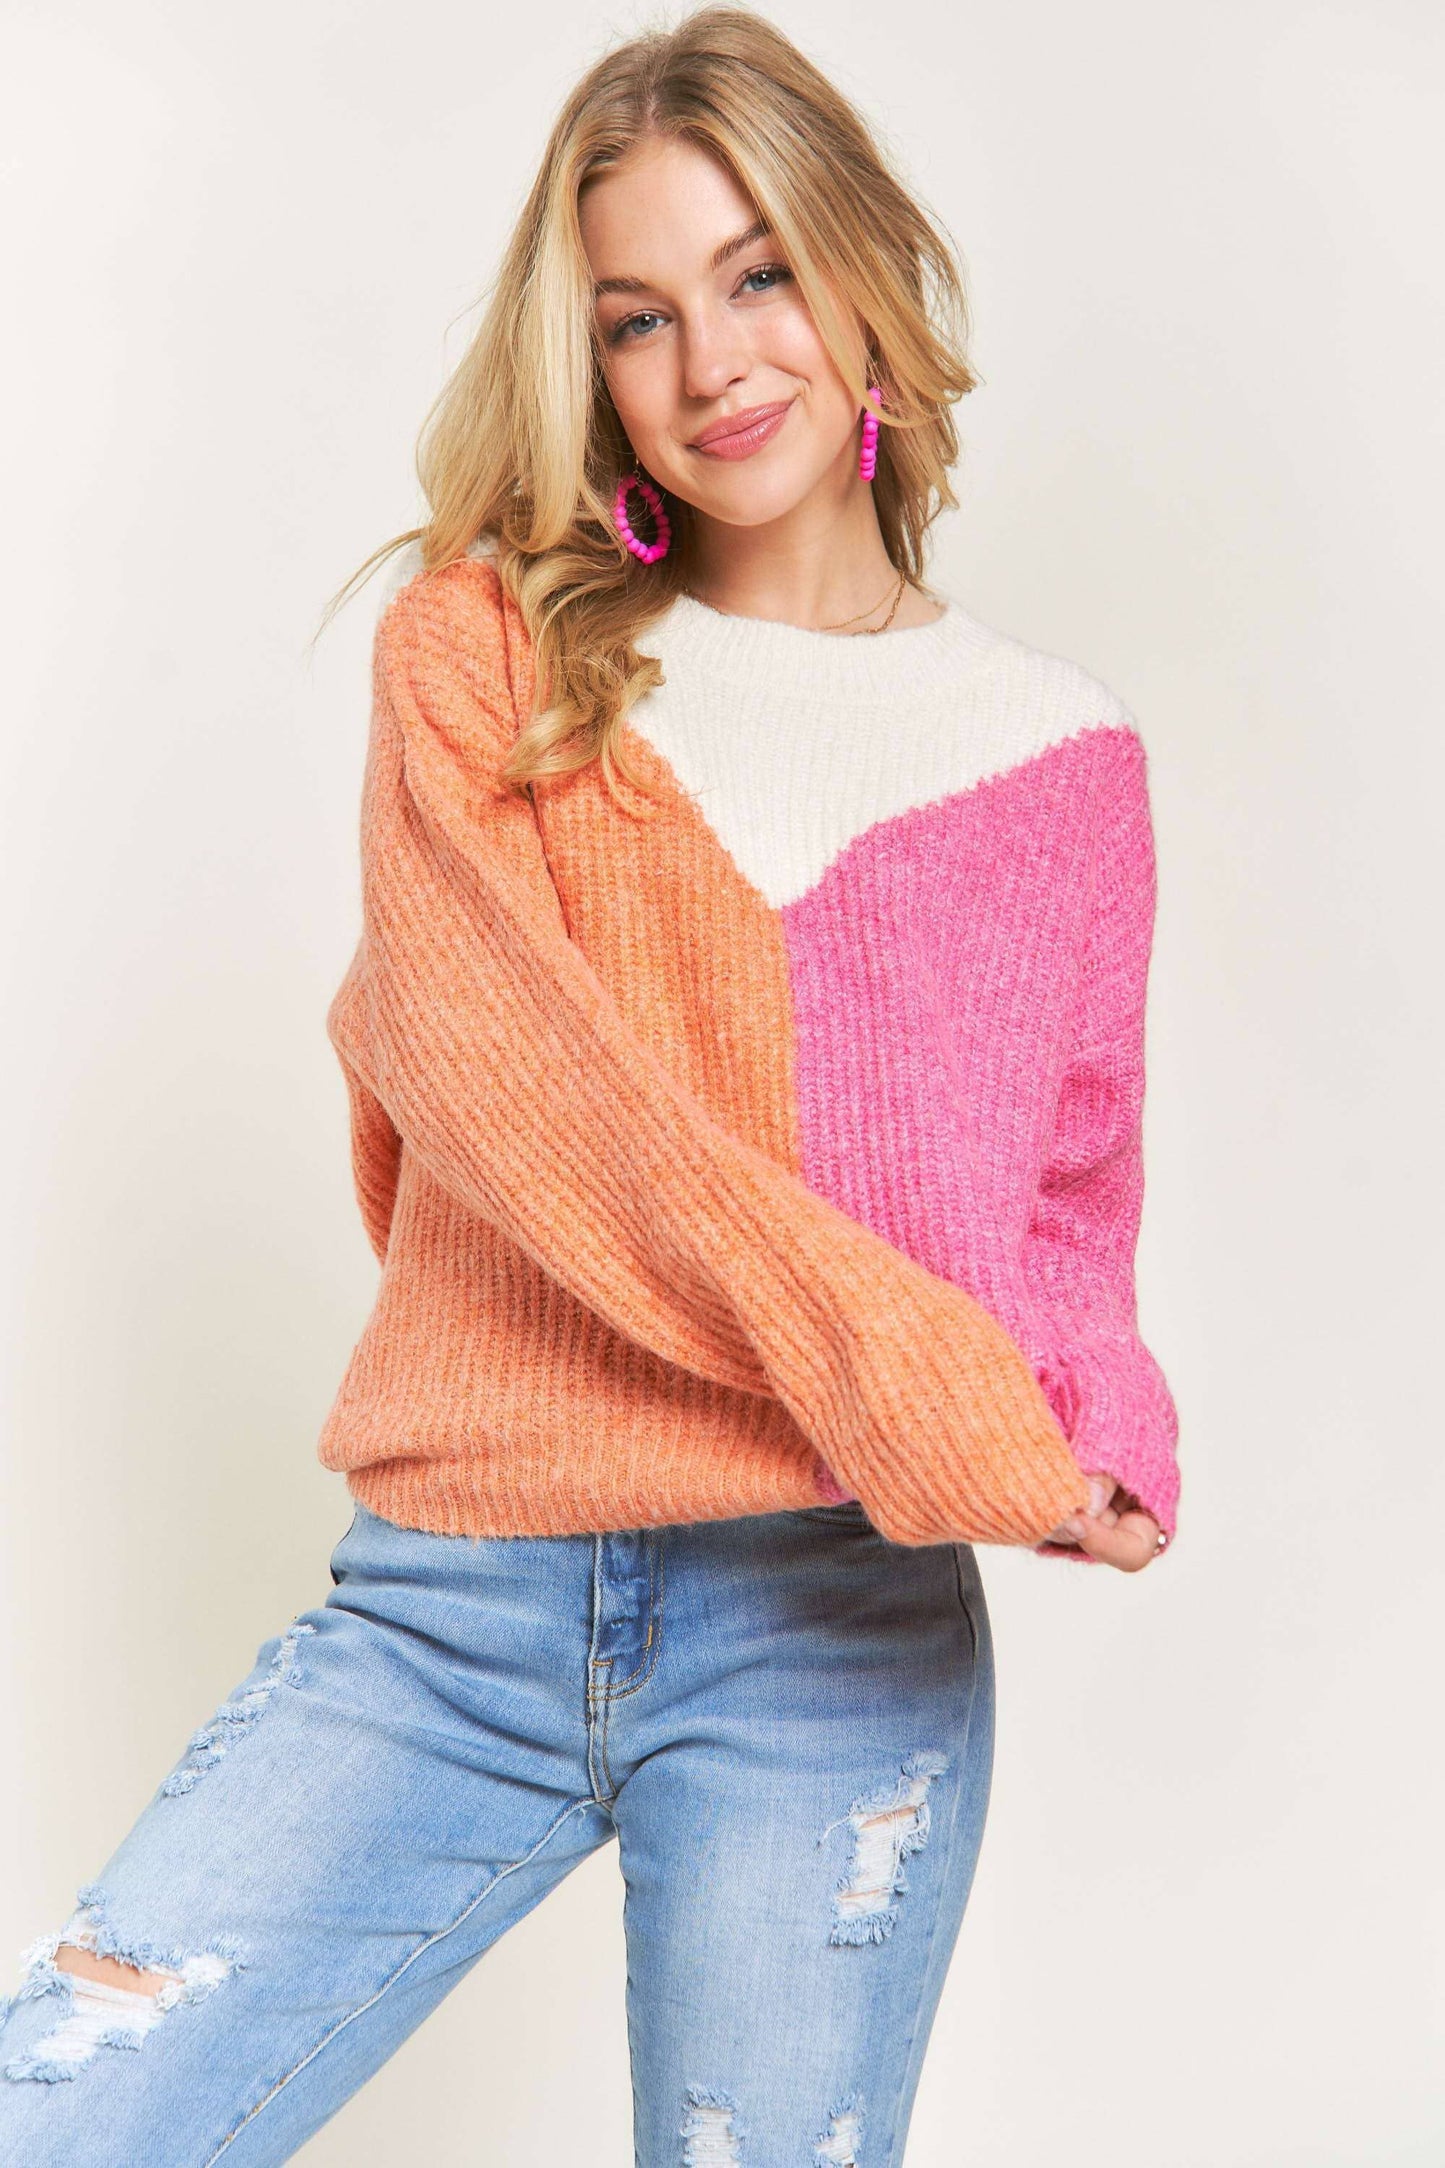 ORANGE AND PINK COLOR BLOCK COMFY SWEATER TOP